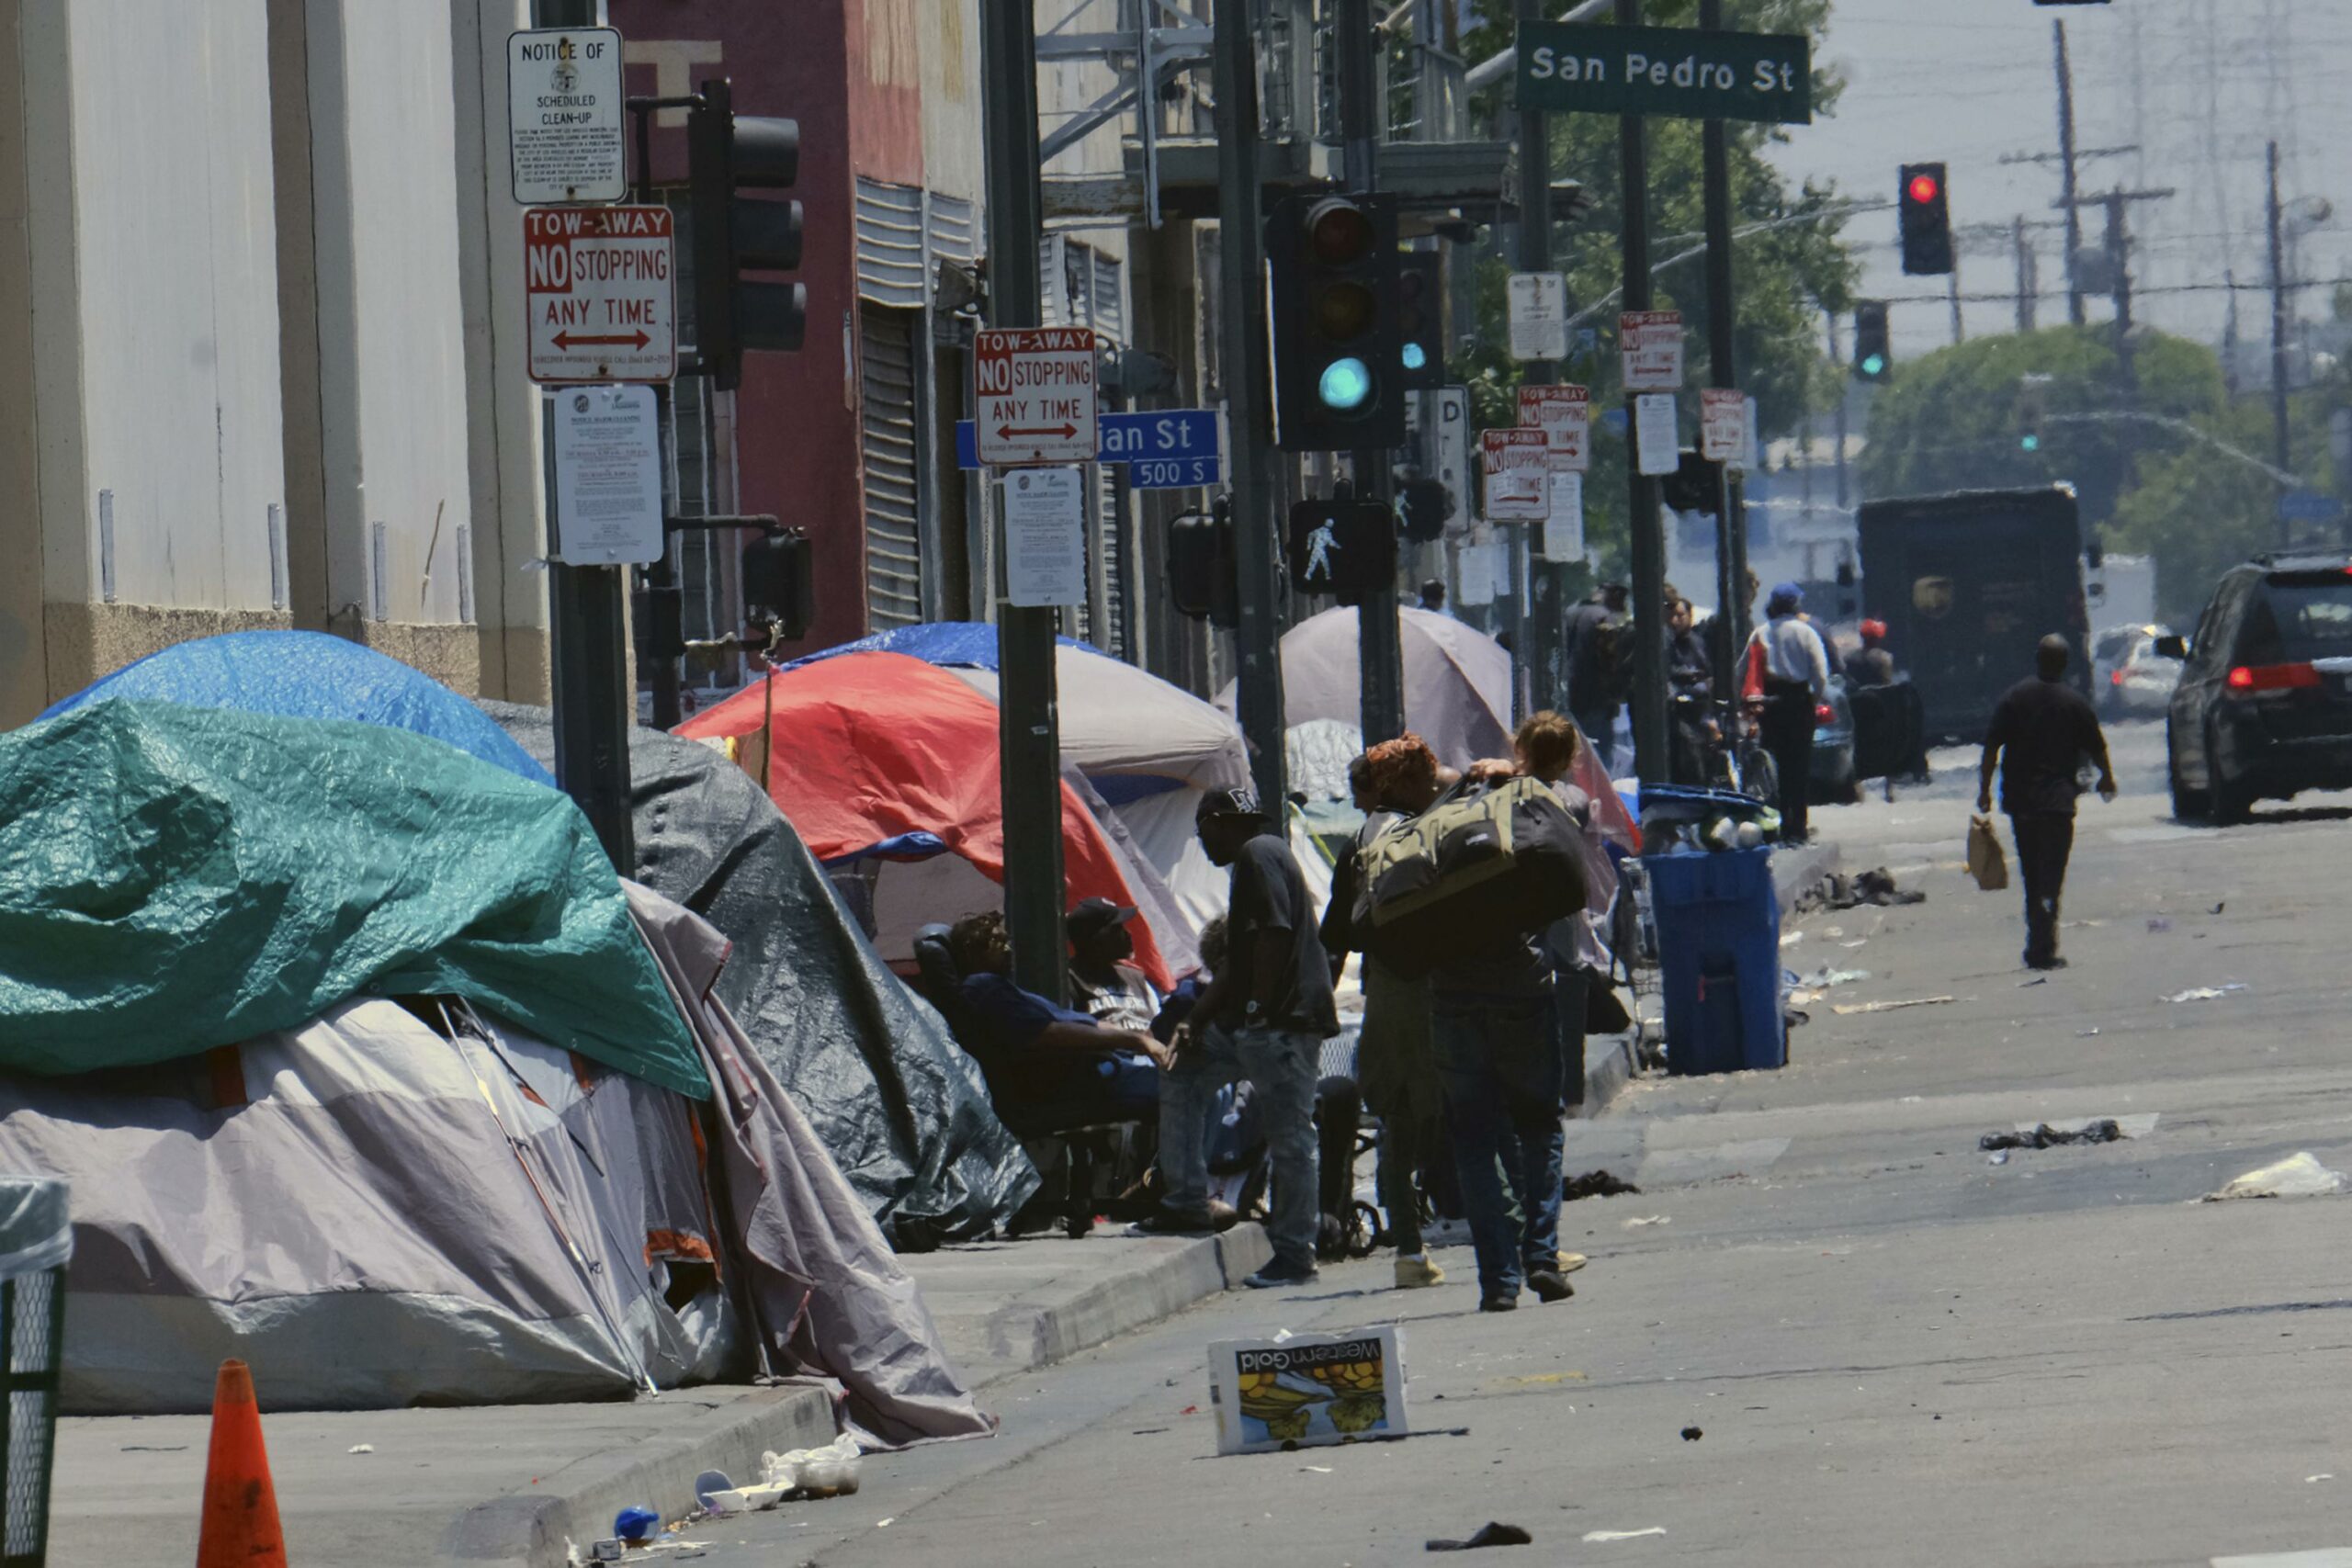 LA homeless numbers up…